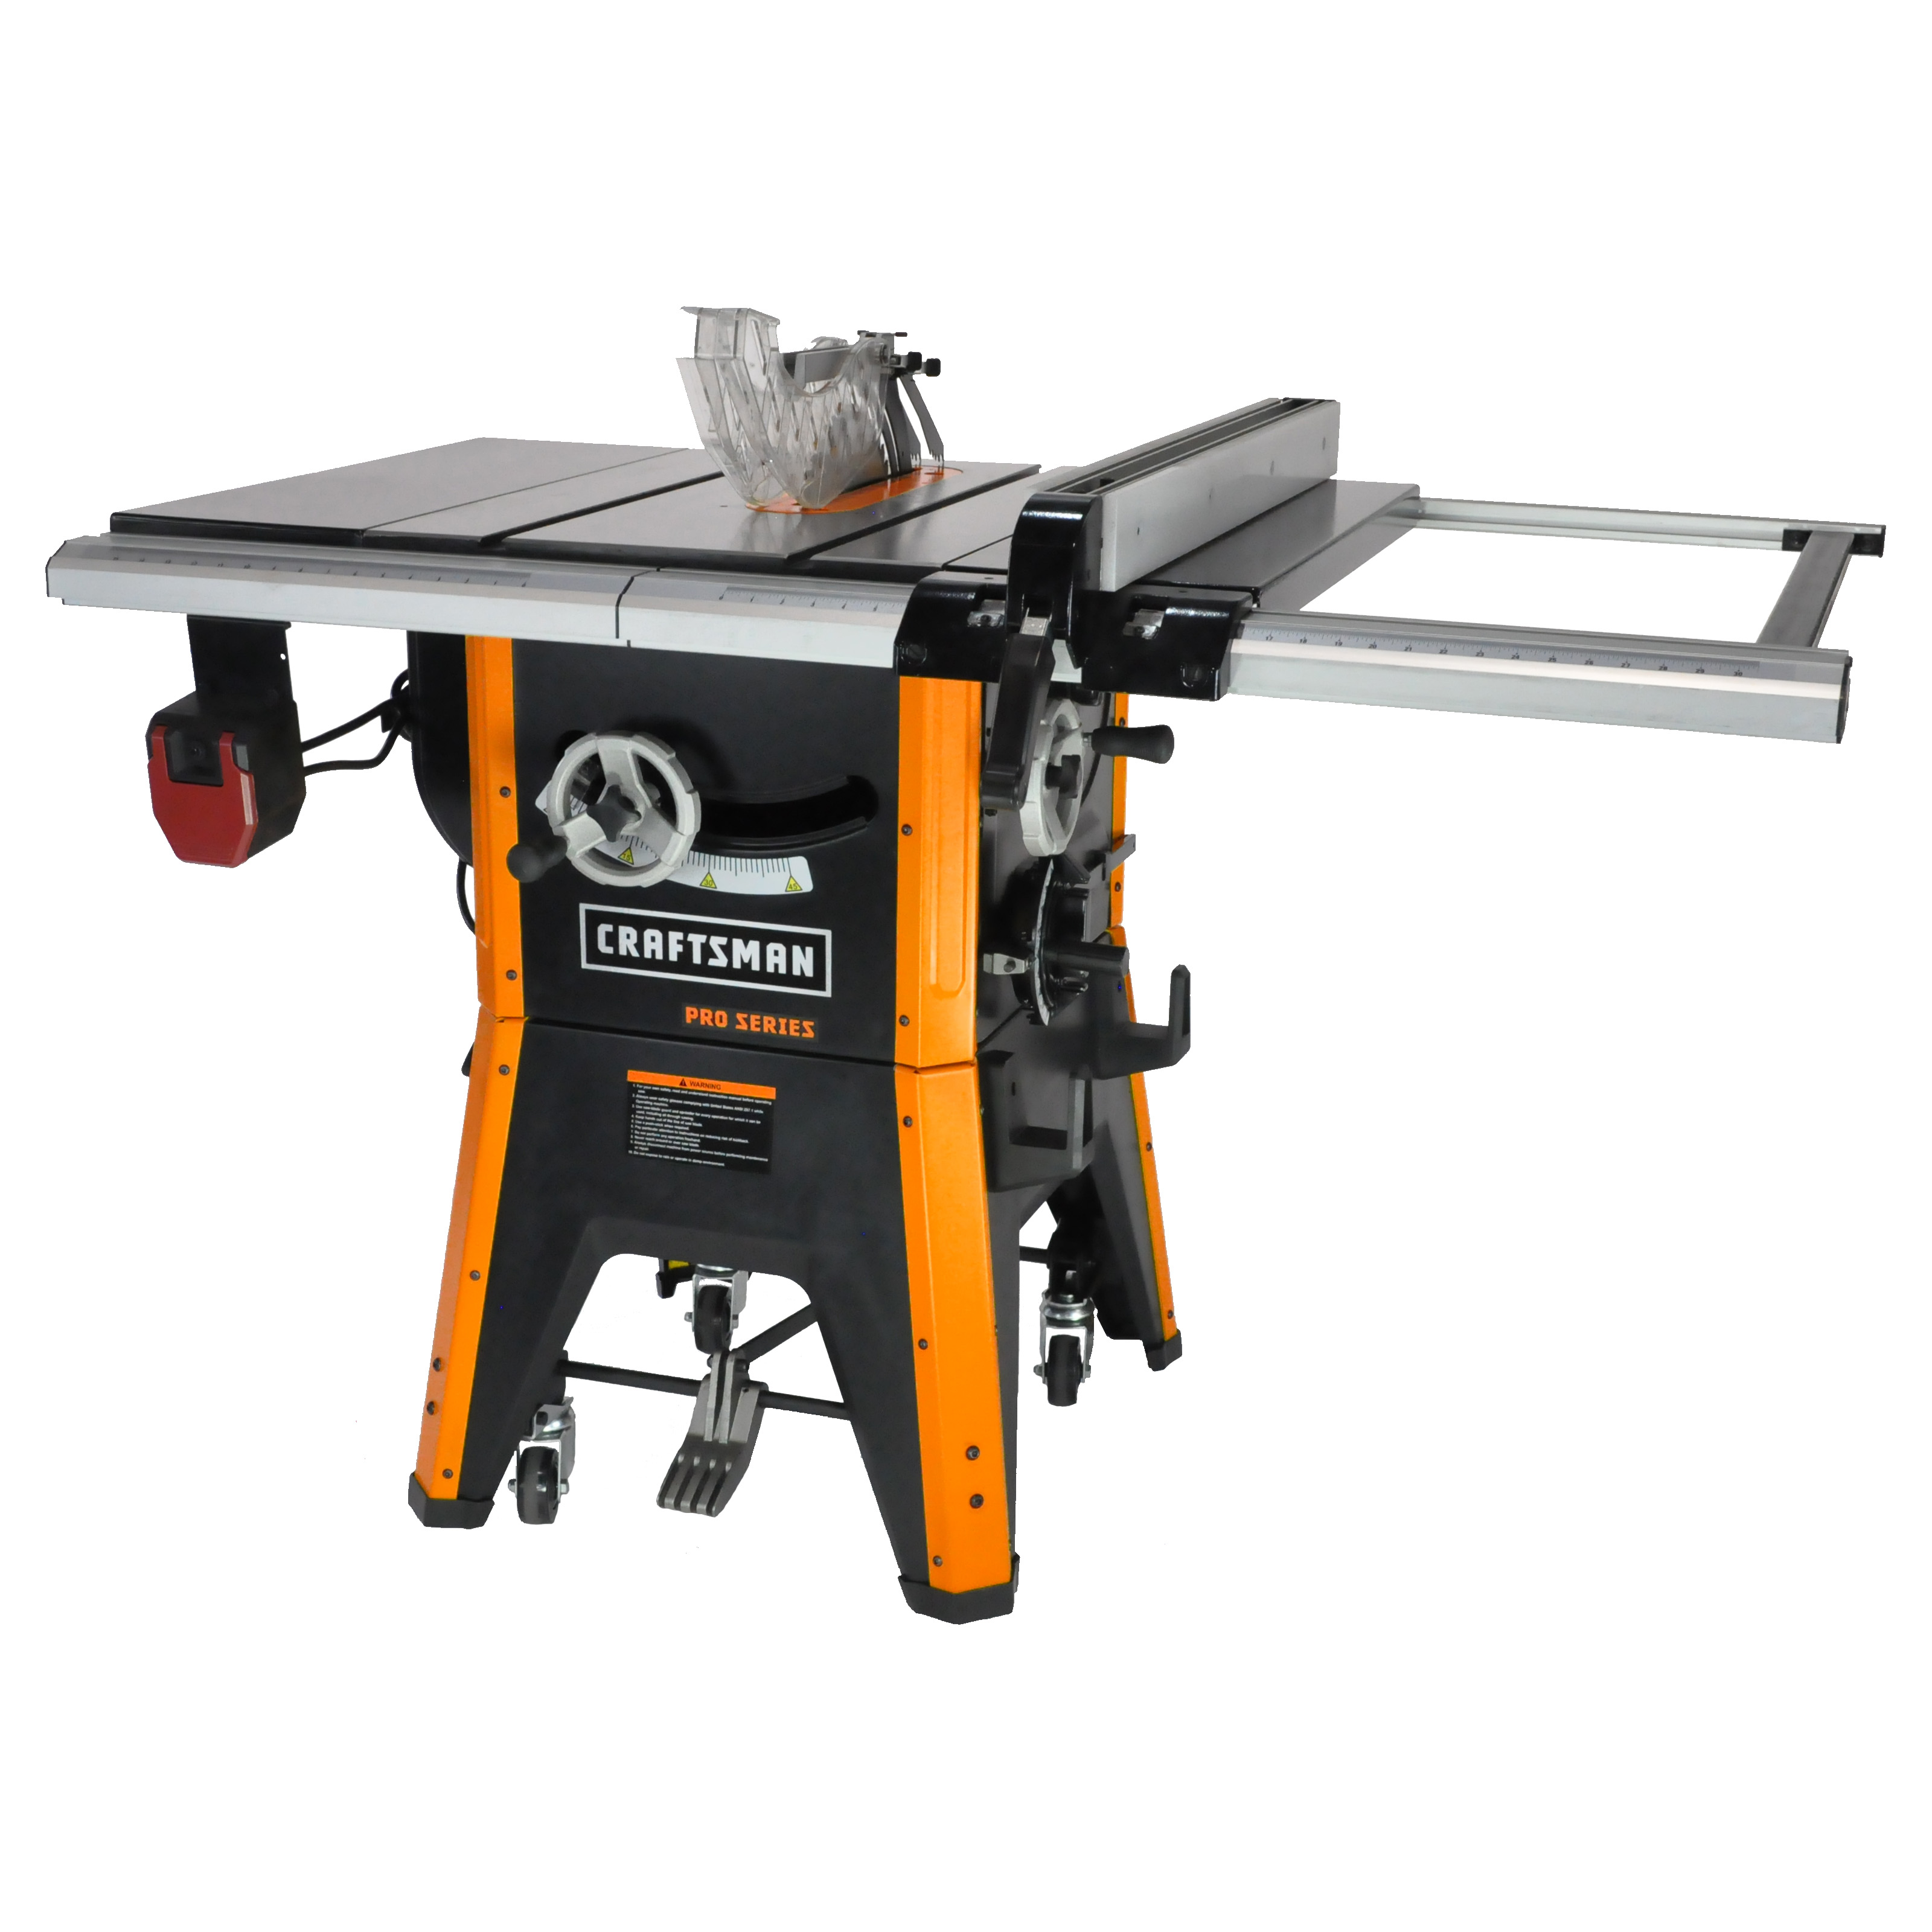 Craftsman ProSeries 10"  CONTRACTOR TABLE SAW